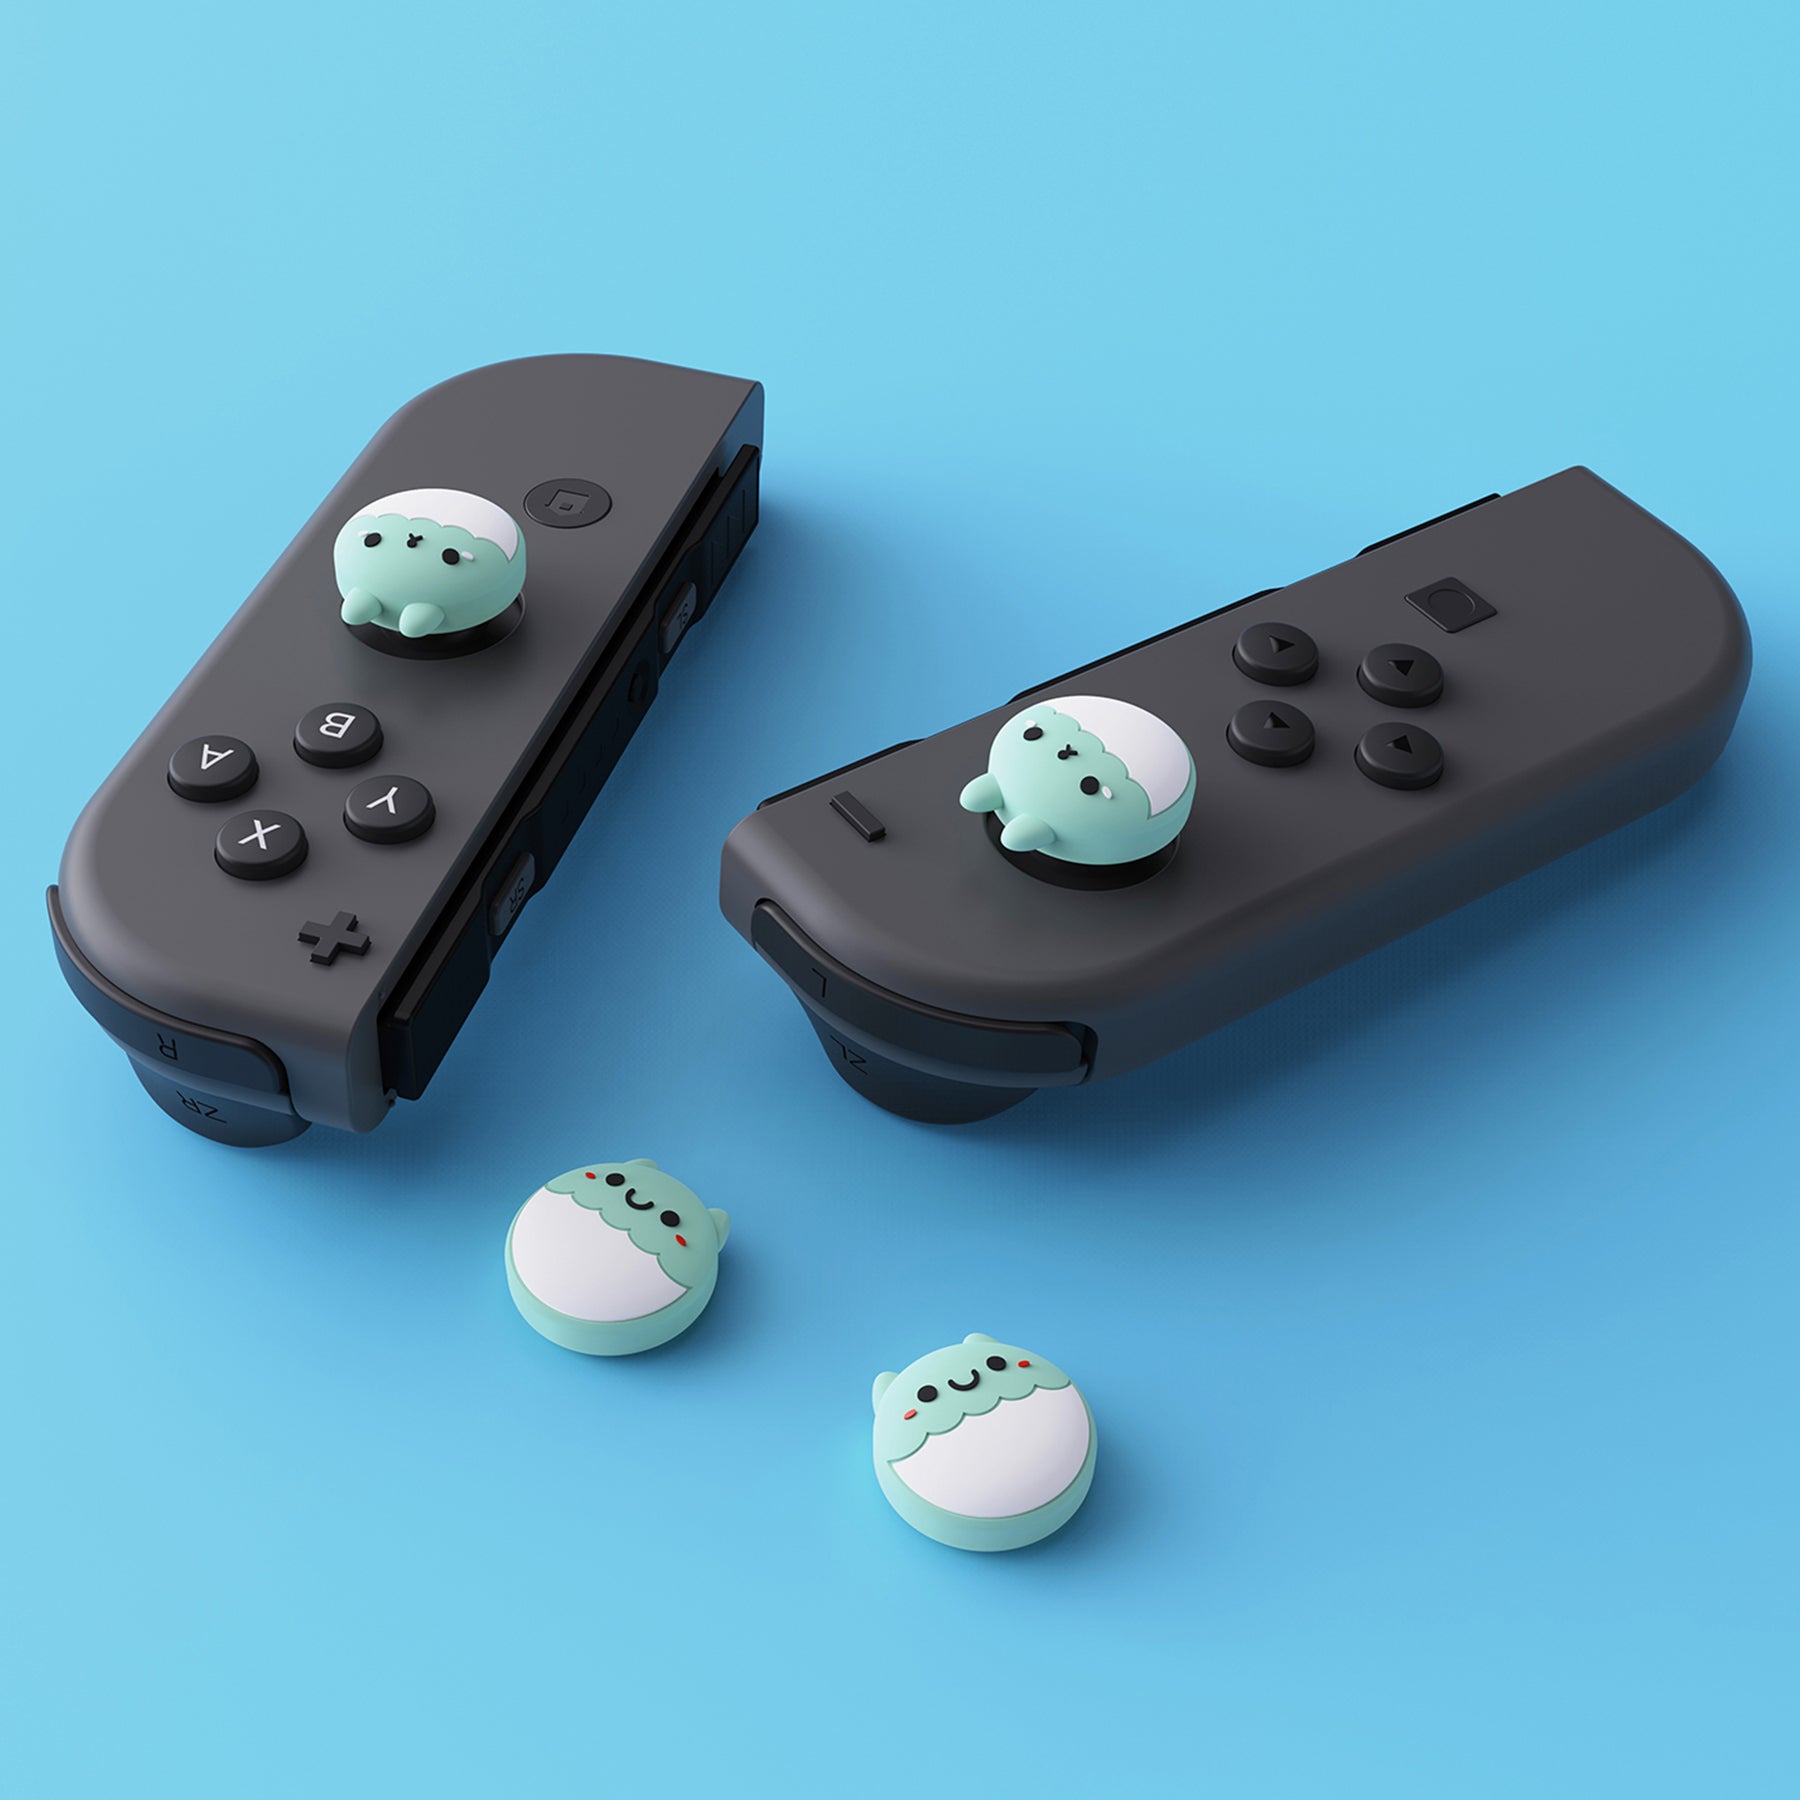 PlayVital Rabbit & Squirrel Cute Thumb Grip Caps for Nintendo Switch, Joystick Caps for Nintendo Switch Lite, Analog Cover Thumbstick Grips for OLED Joycon - Seafoam Green - NJM1118 playvital